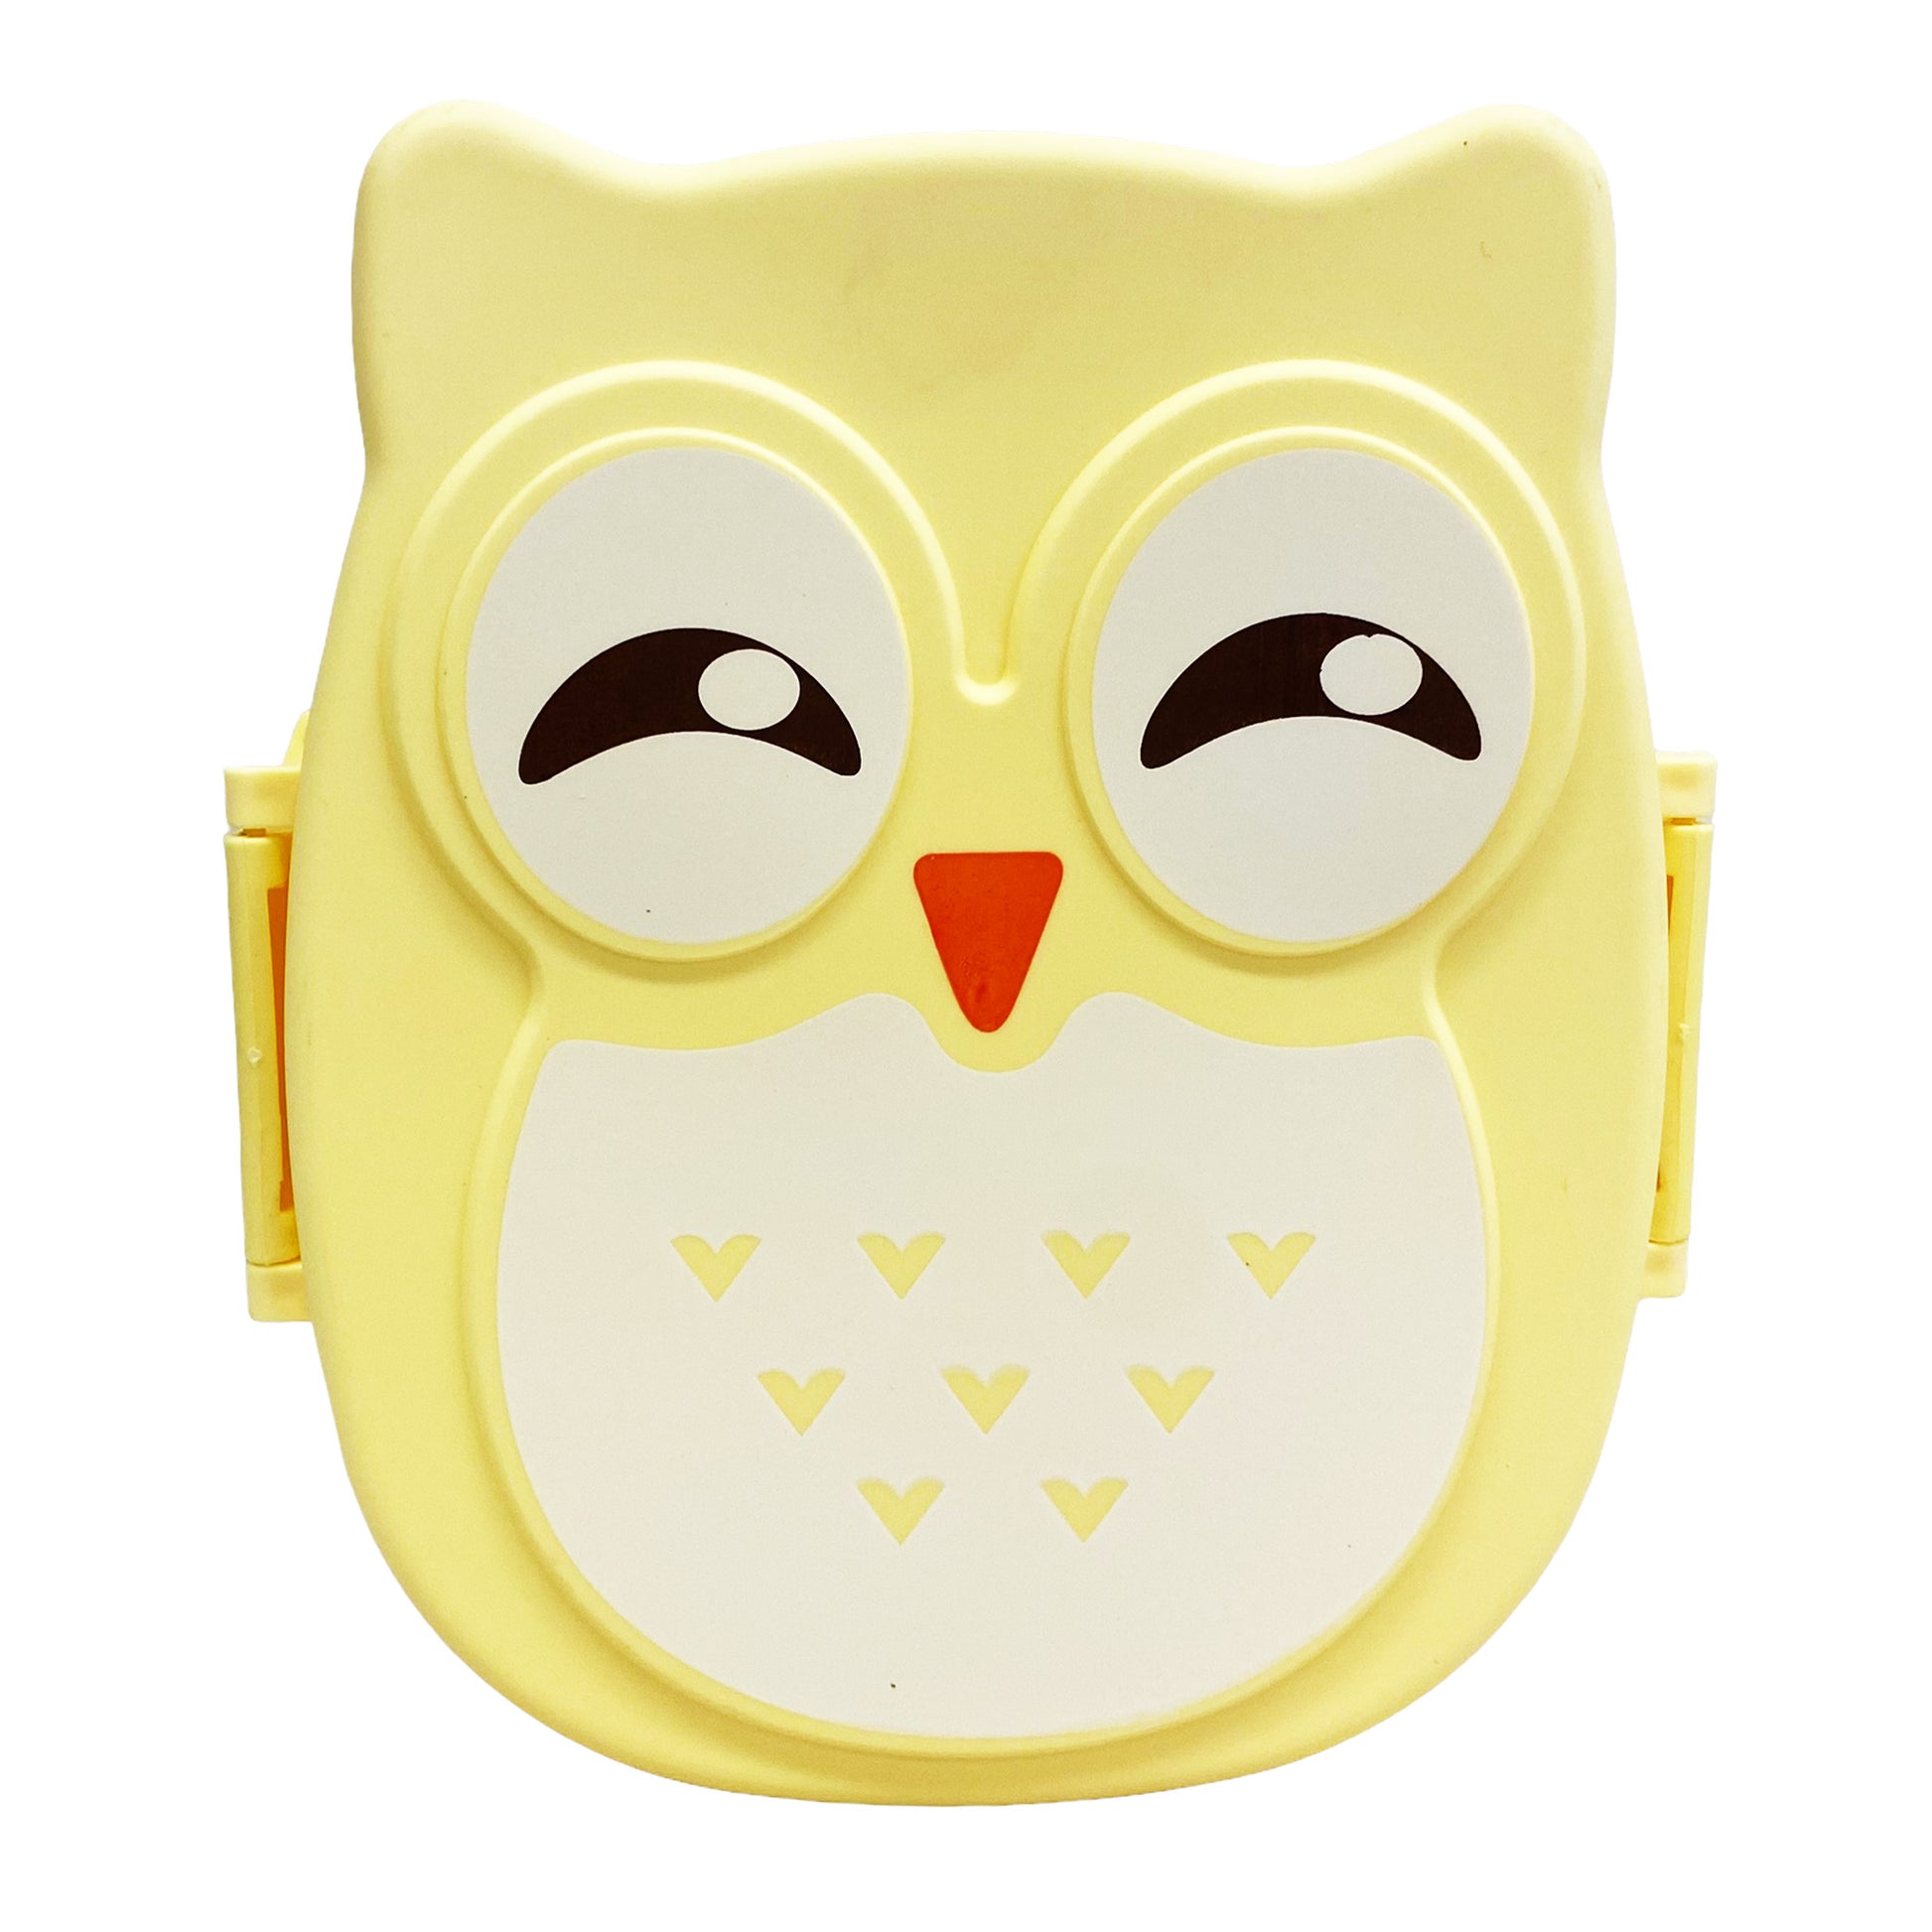 Front graphic view of Owl Lunch Box Set - Yellow 6 X 5.5 X 2.5 Inches